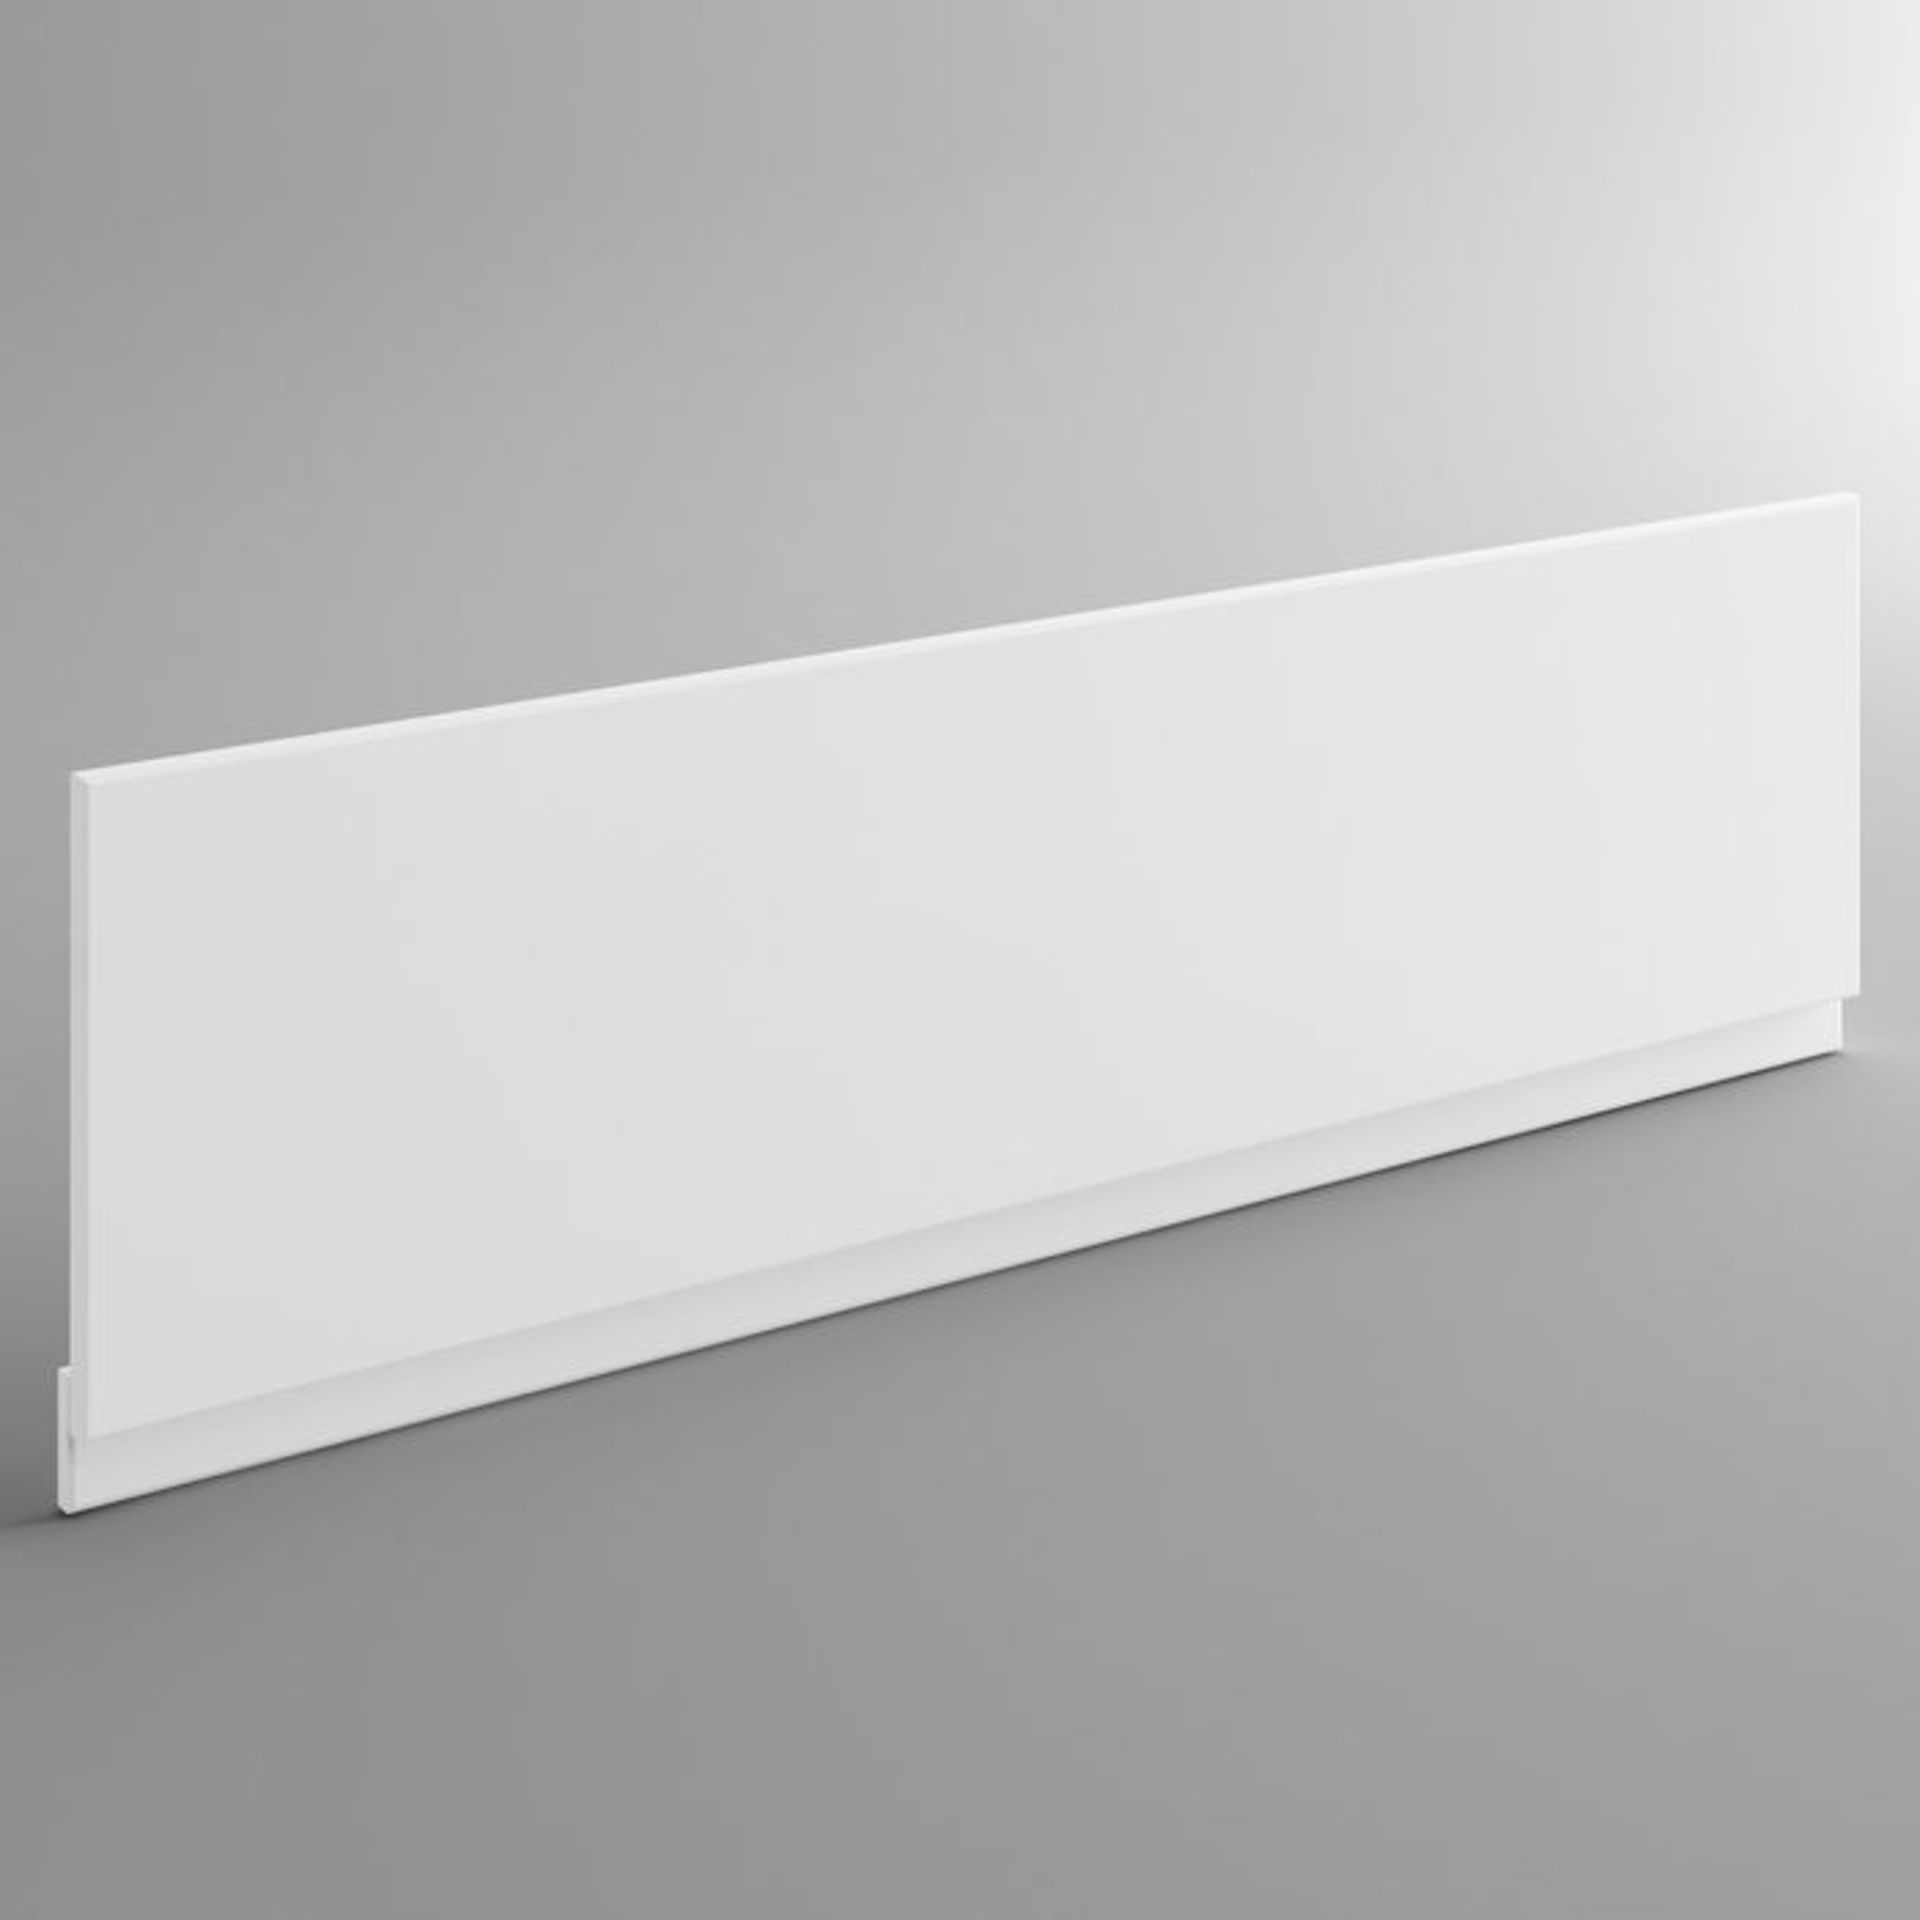 (S191) 1800mm MDF Bath Front Panel - Gloss White. RRP £89.99. 18mm thick durable MDF board - Image 2 of 2